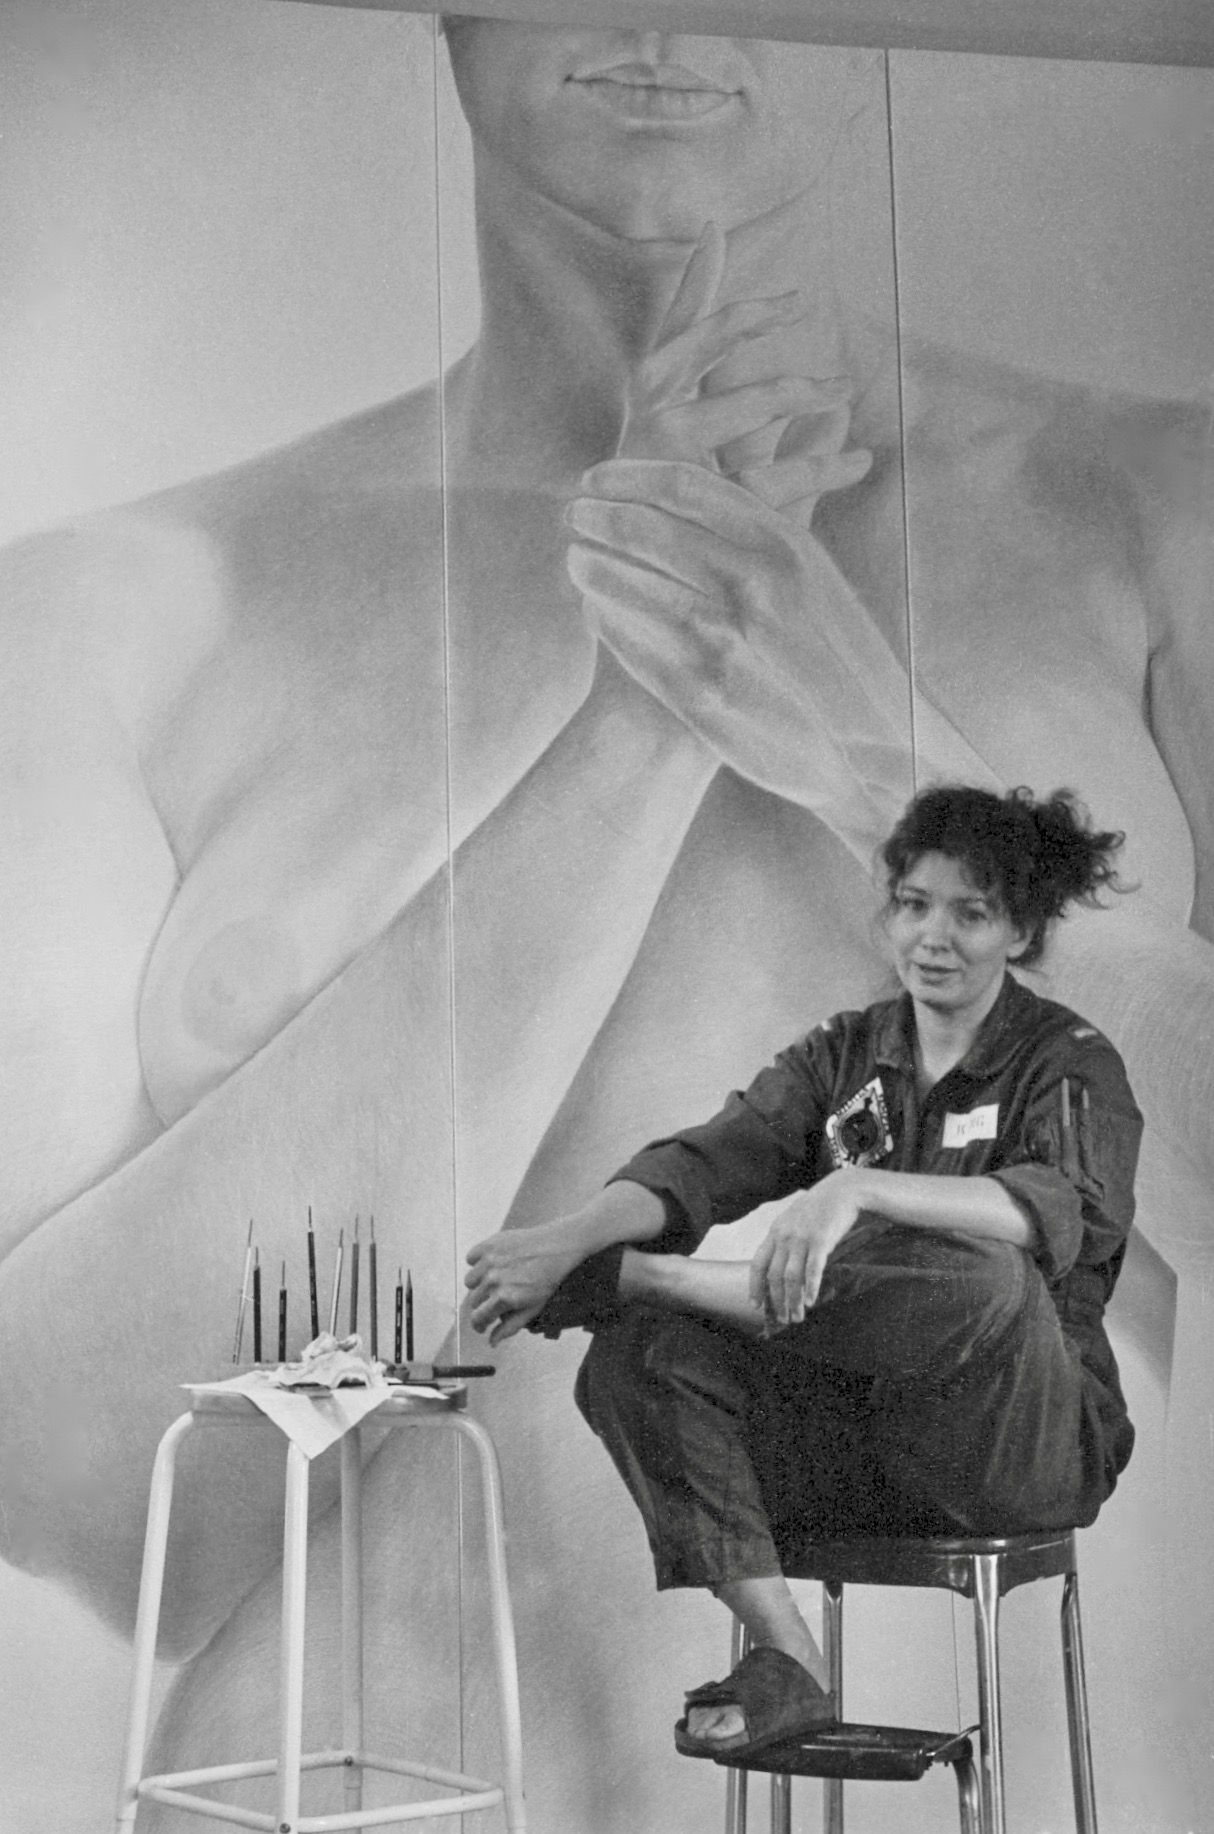 Image of the artist in front of a large figure drawing